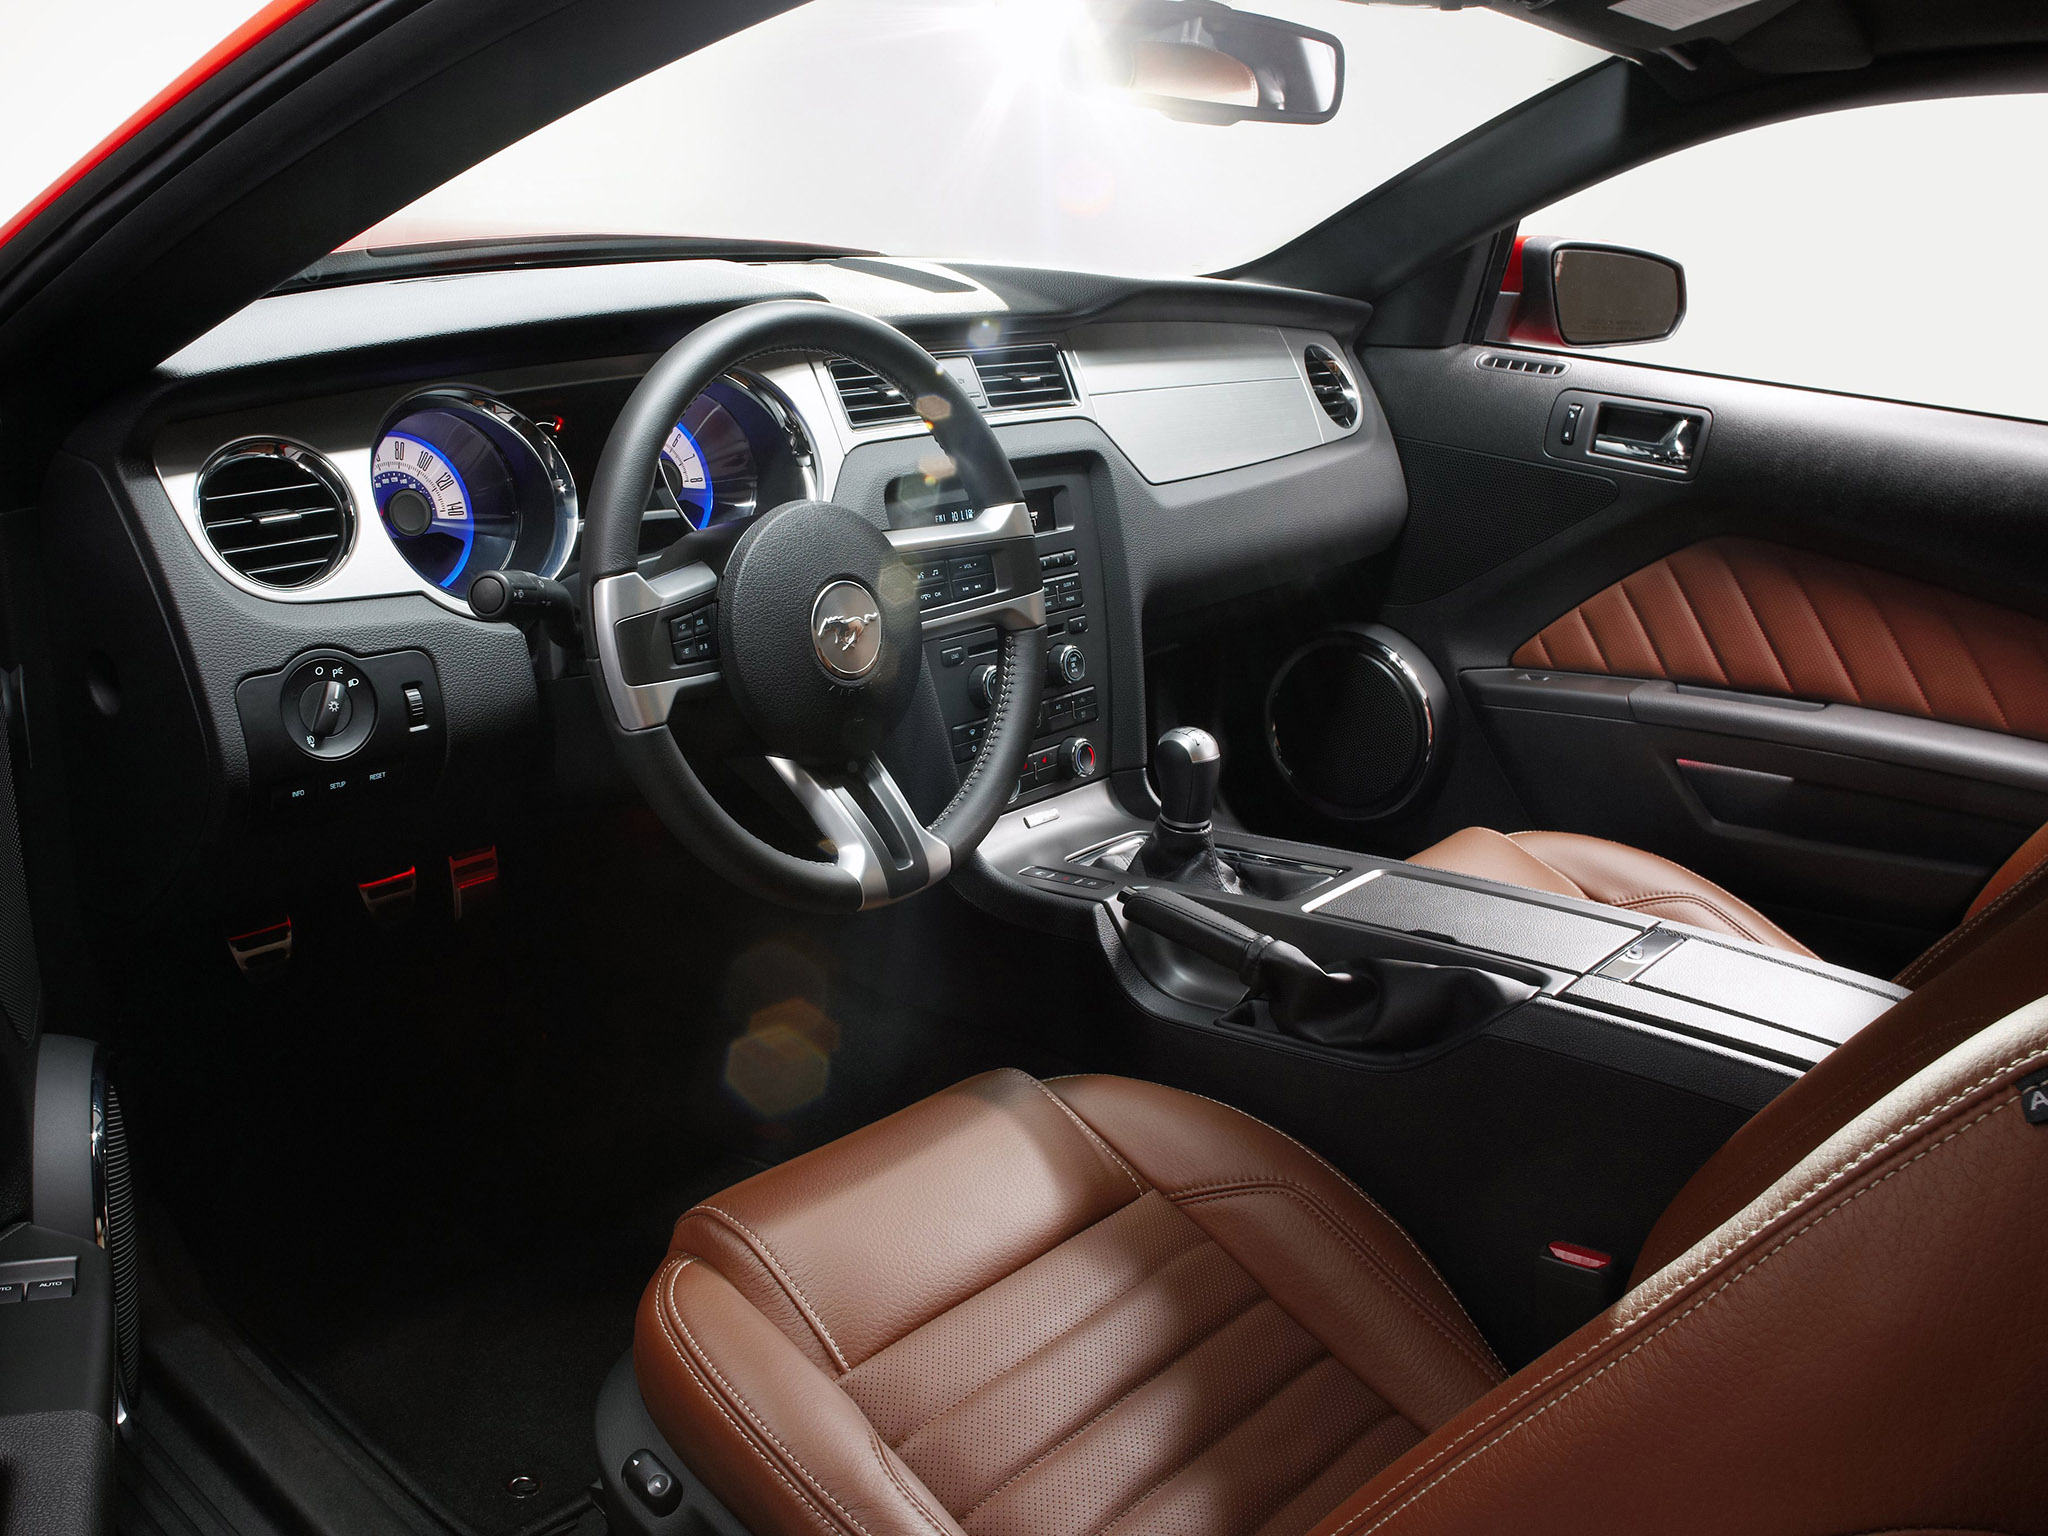 2010, Ford, Mustang, G t, Muscle, Interior Wallpaper